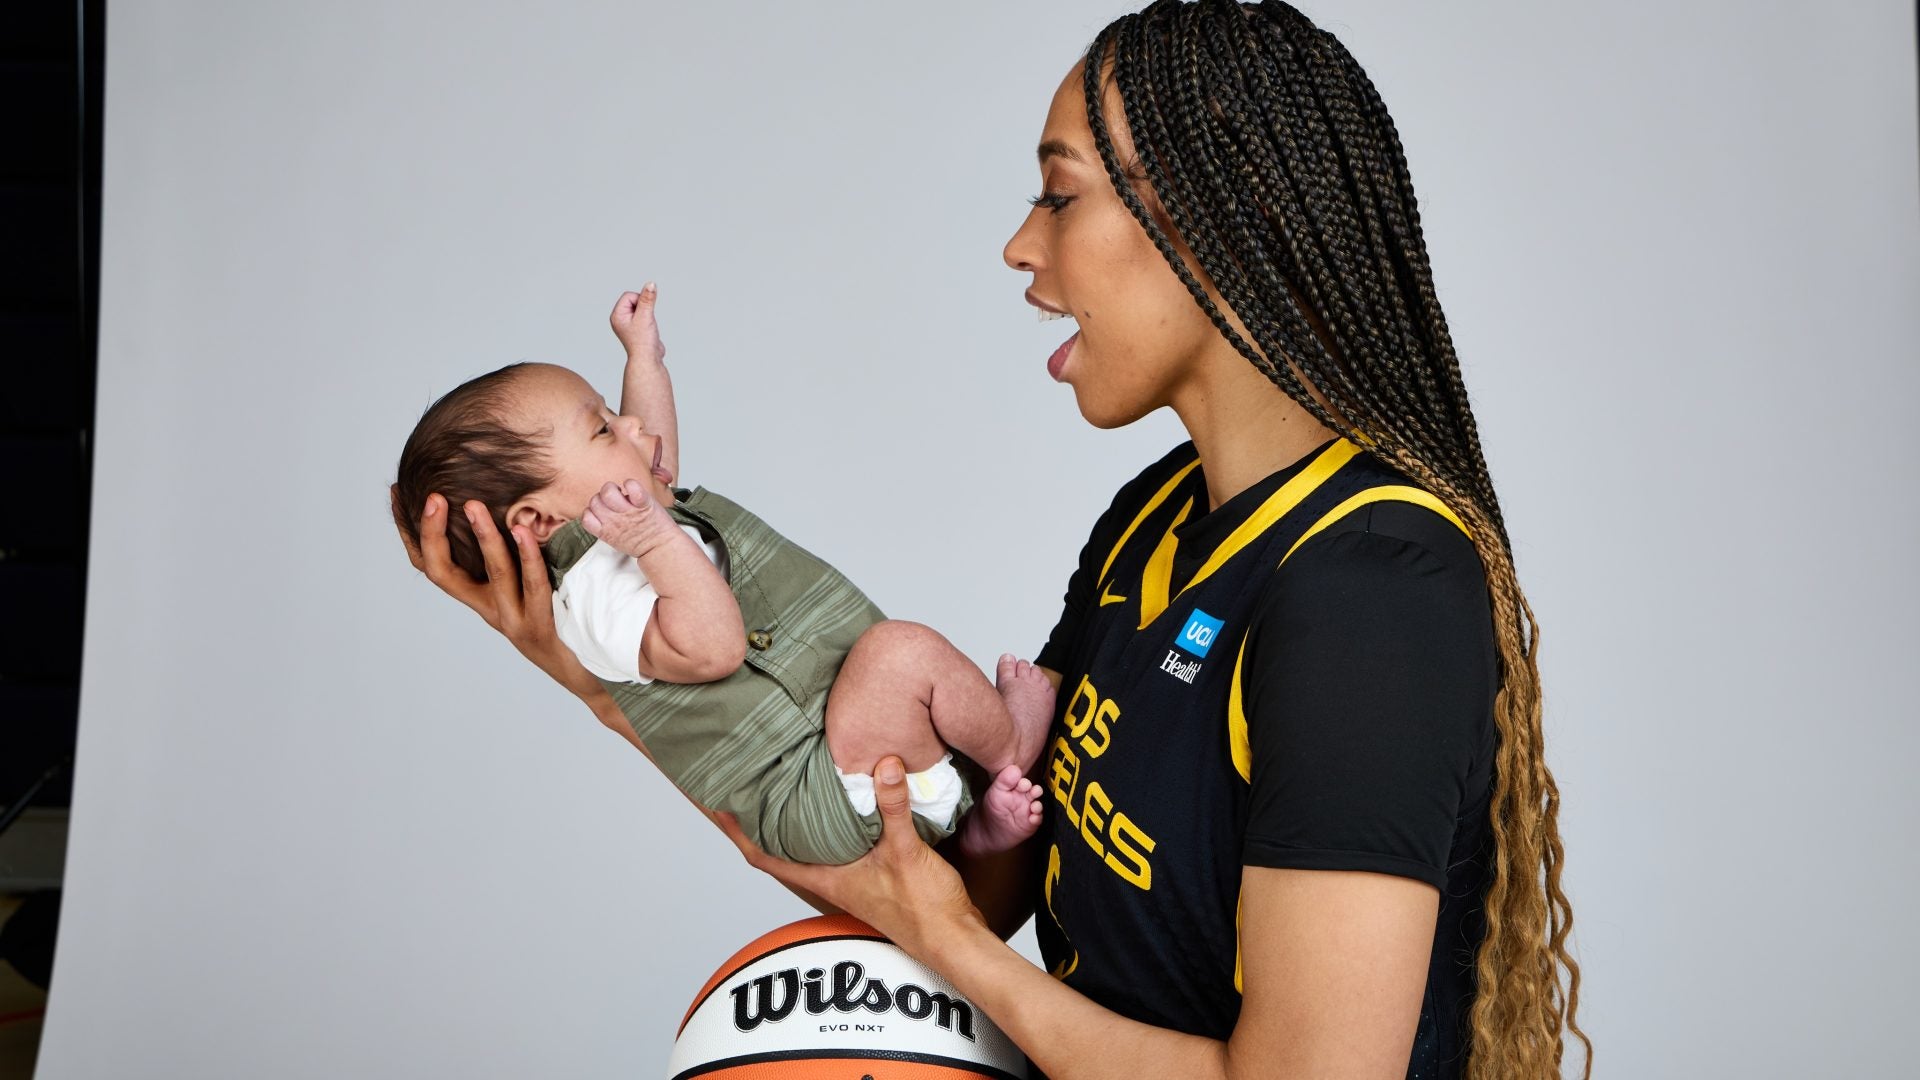 WNBA Star Dearica Hamby Faced Discrimination While Pregnant. She's Now An Advocate For Working Moms On And Off The Court.